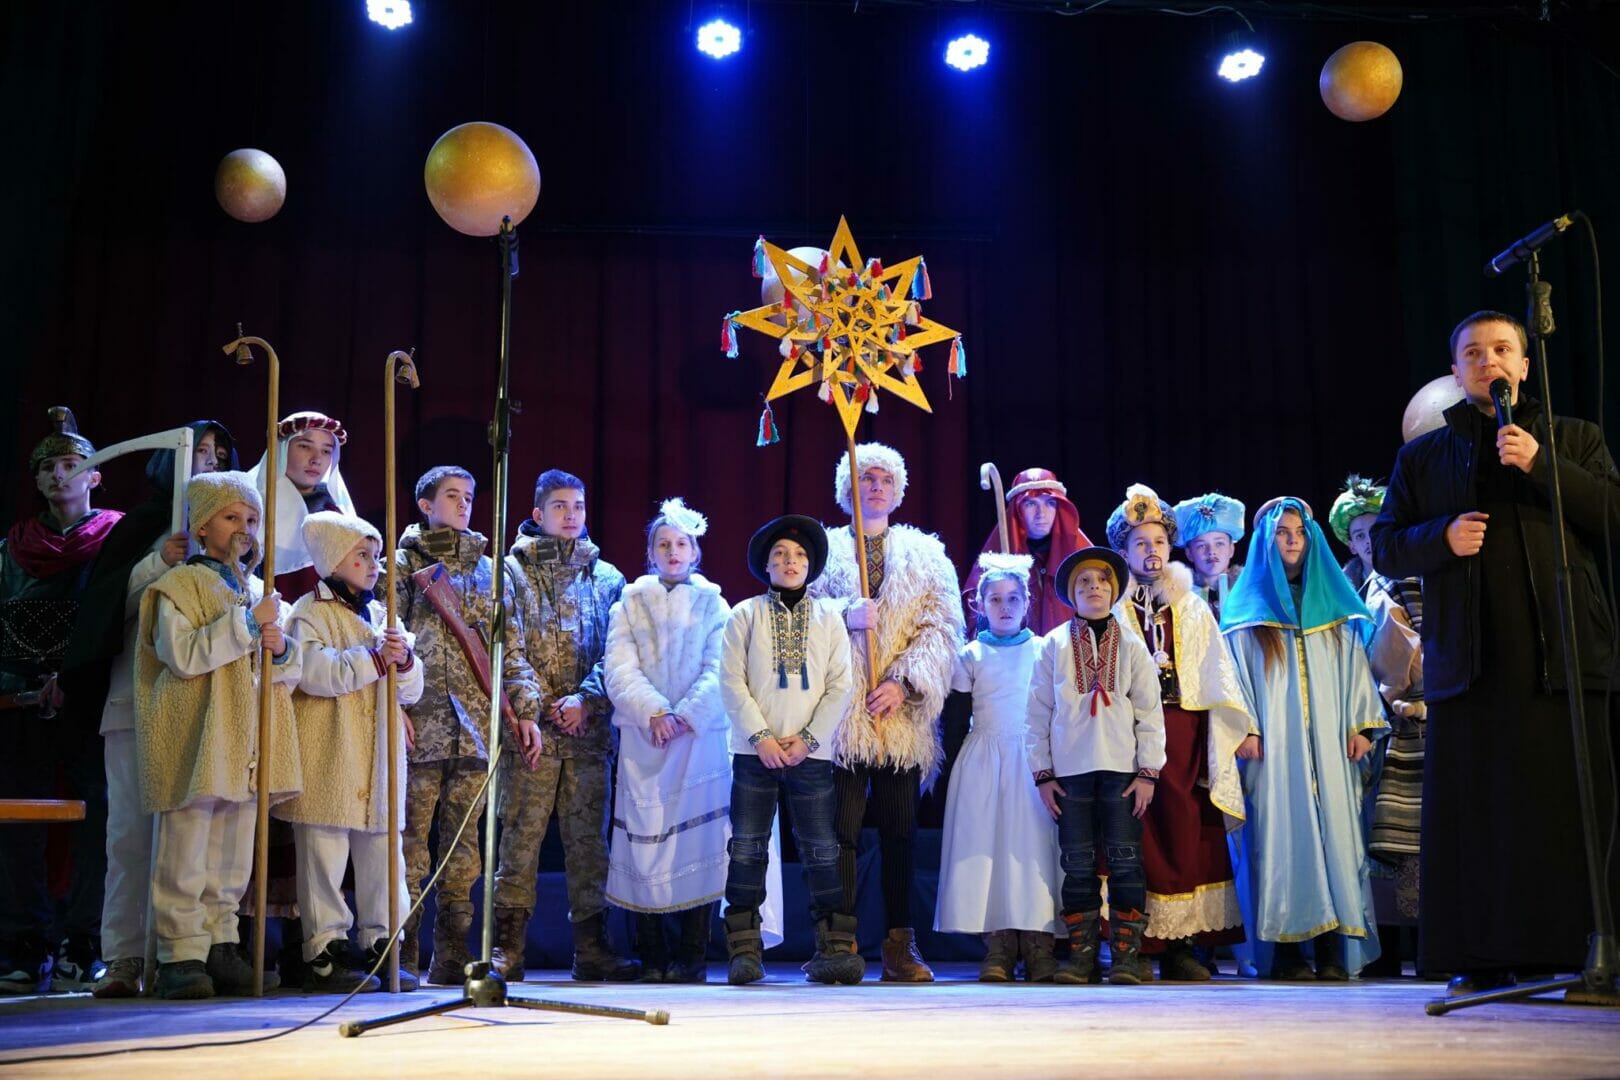 A Nativity play organized by community residents and displaced children to collect funds for two cars for the military